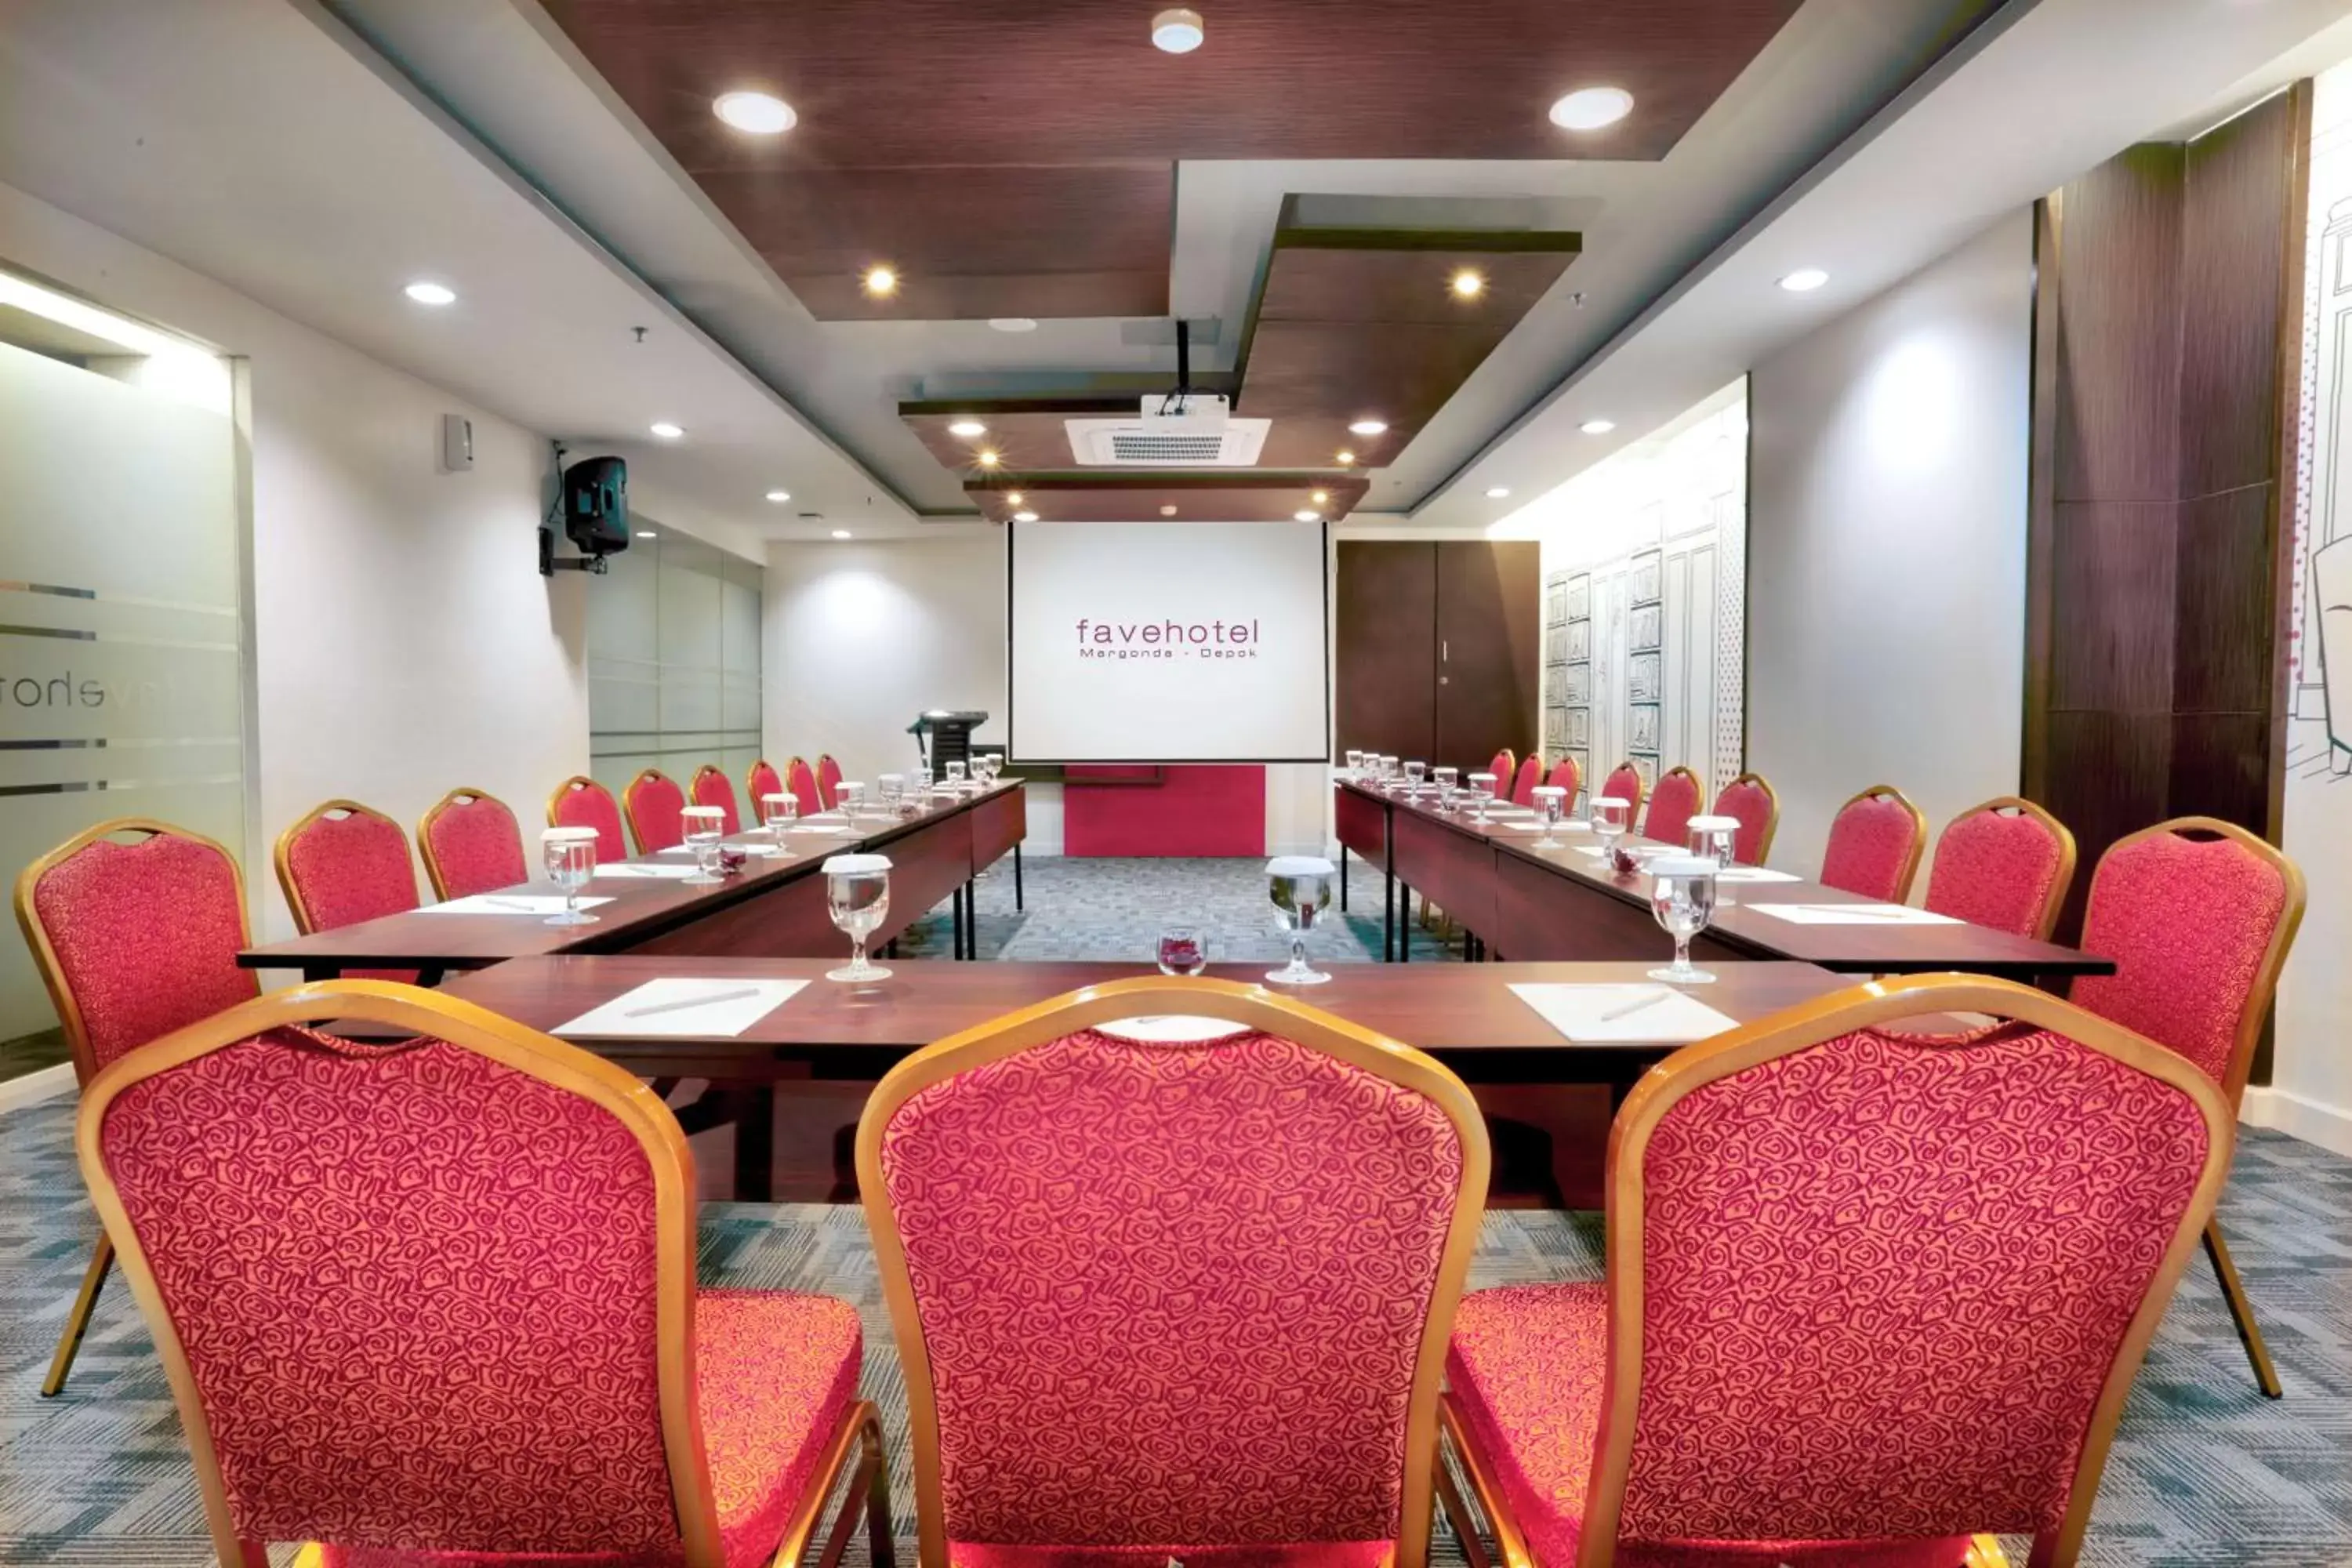 Meeting/conference room in favehotel Margonda